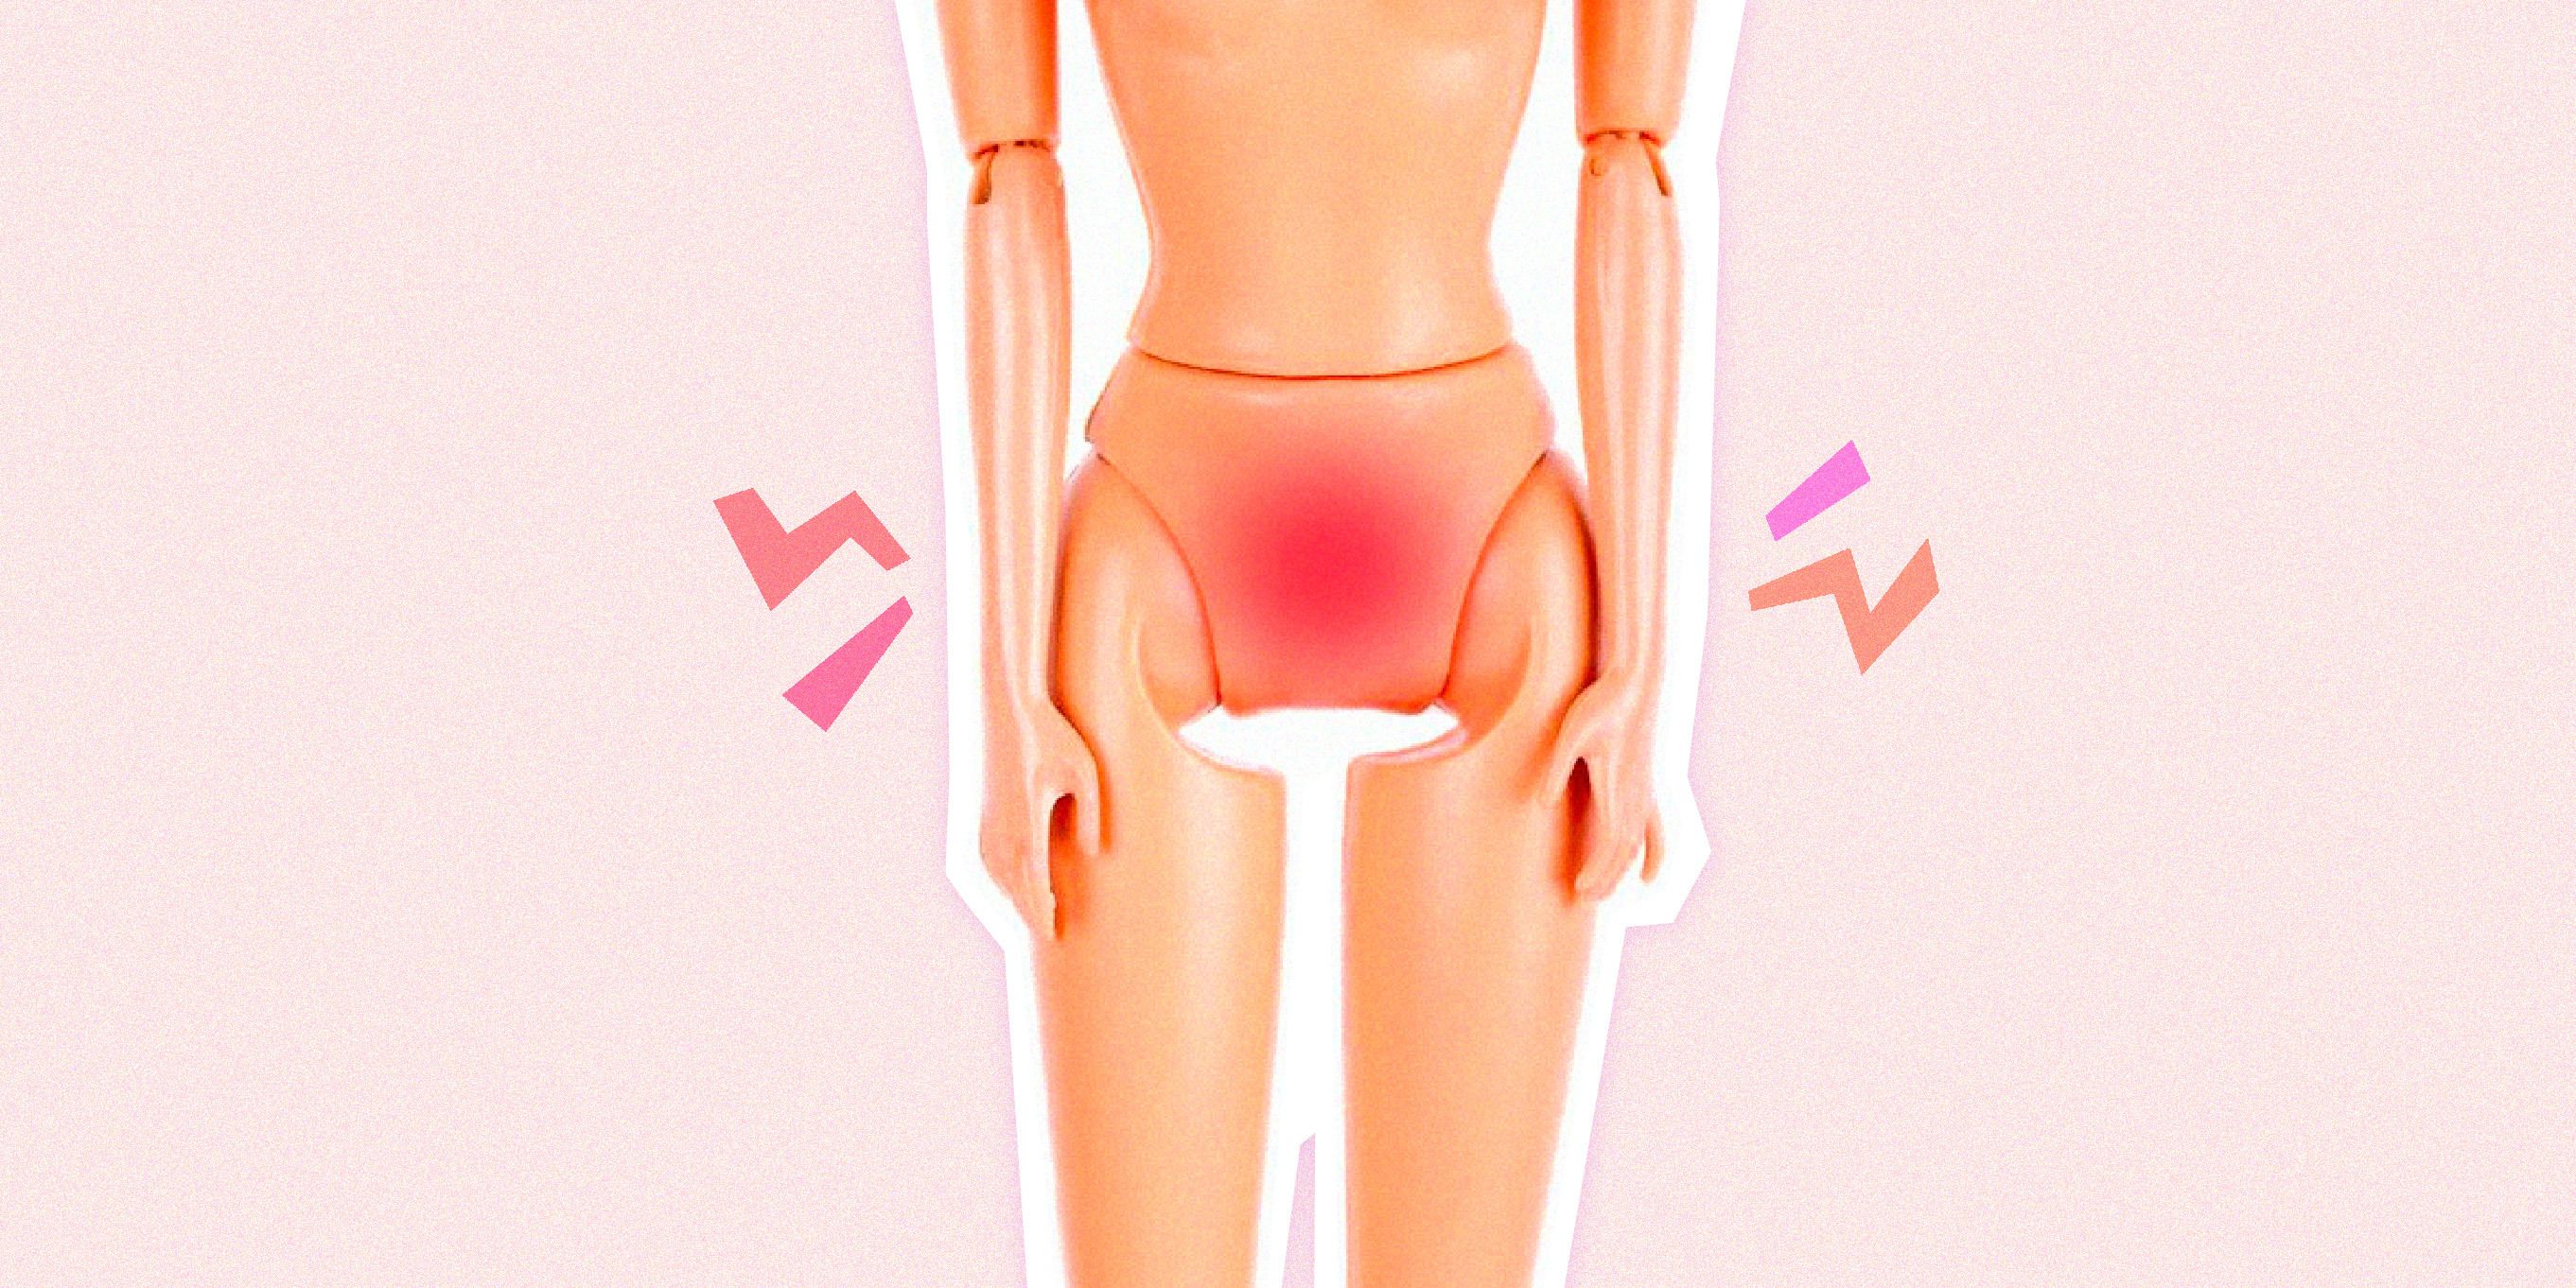 6 Reasons Why You Might Have Vaginal Itching